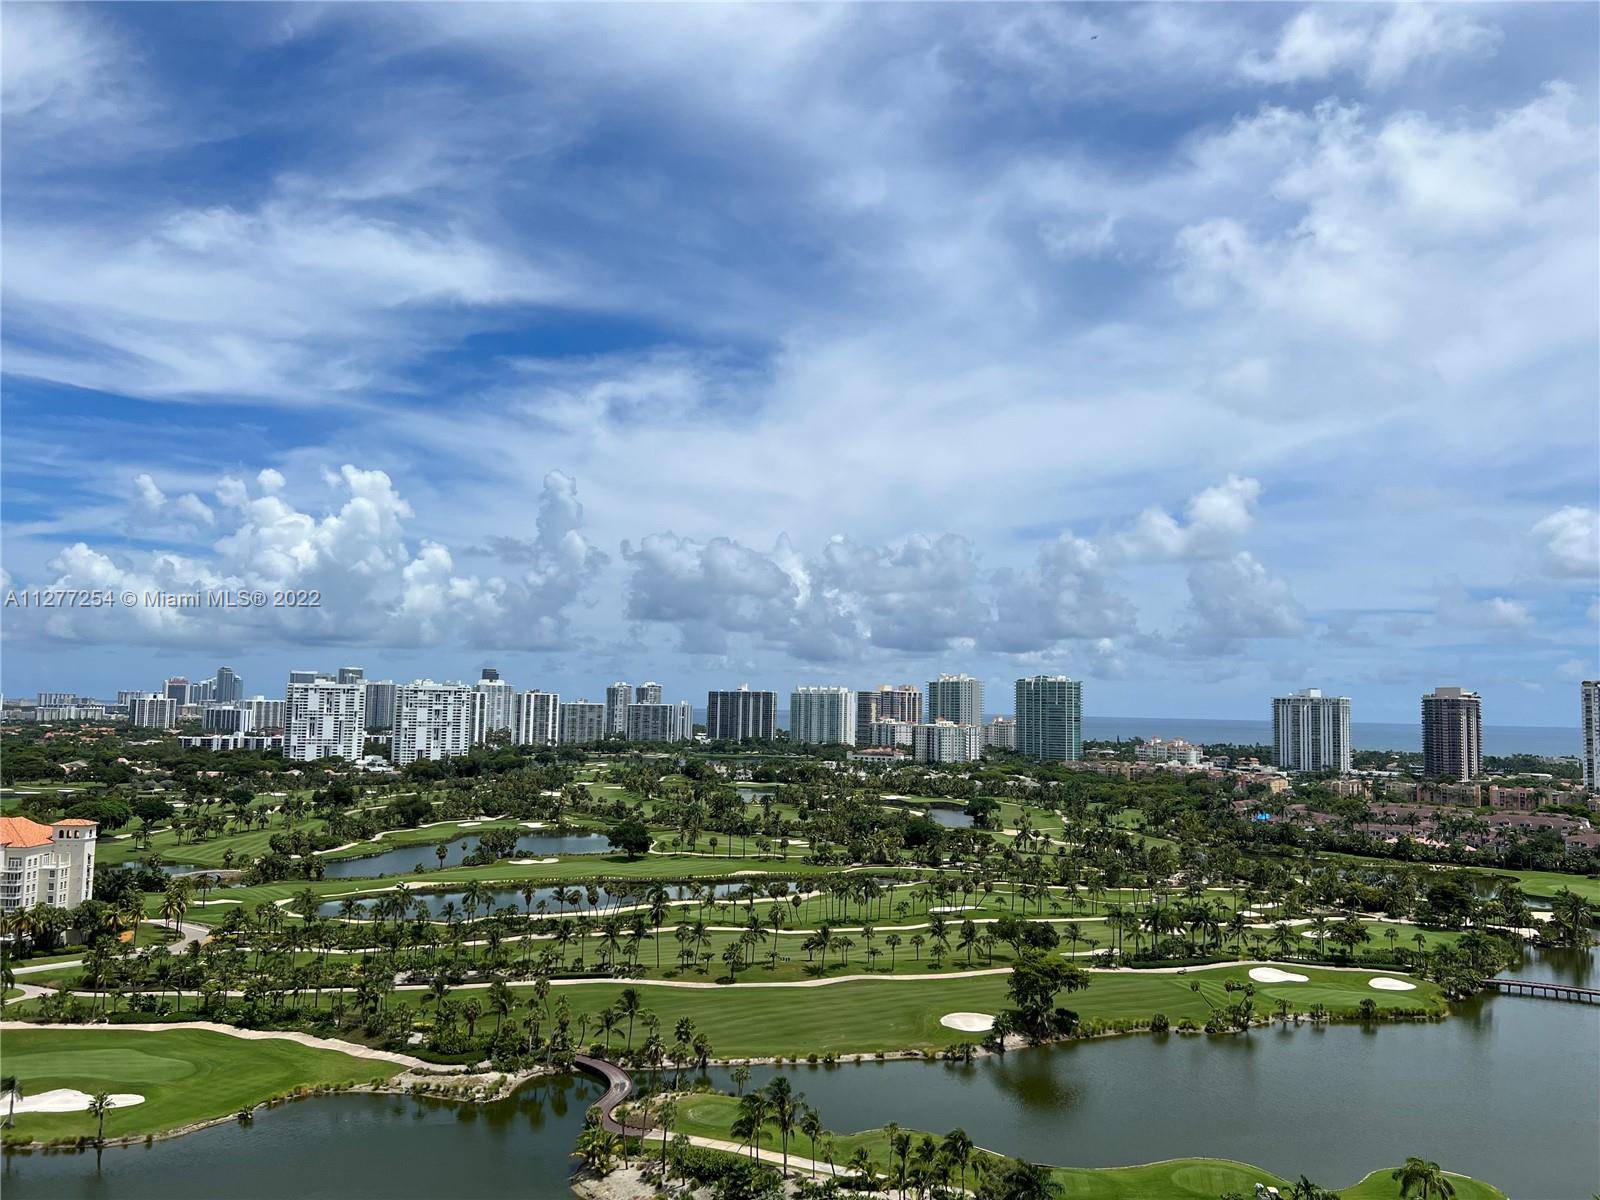 FABULOUS RENTAL 2 BED 2 FULL BATH WITH SPACIOUS OPEN FLOOR PLAN IN THE ELEGANT TURNBERRY ON THE GREEN BUILDING, A GOLF COURSE FRONT PROPERTY IN AVENTURA.